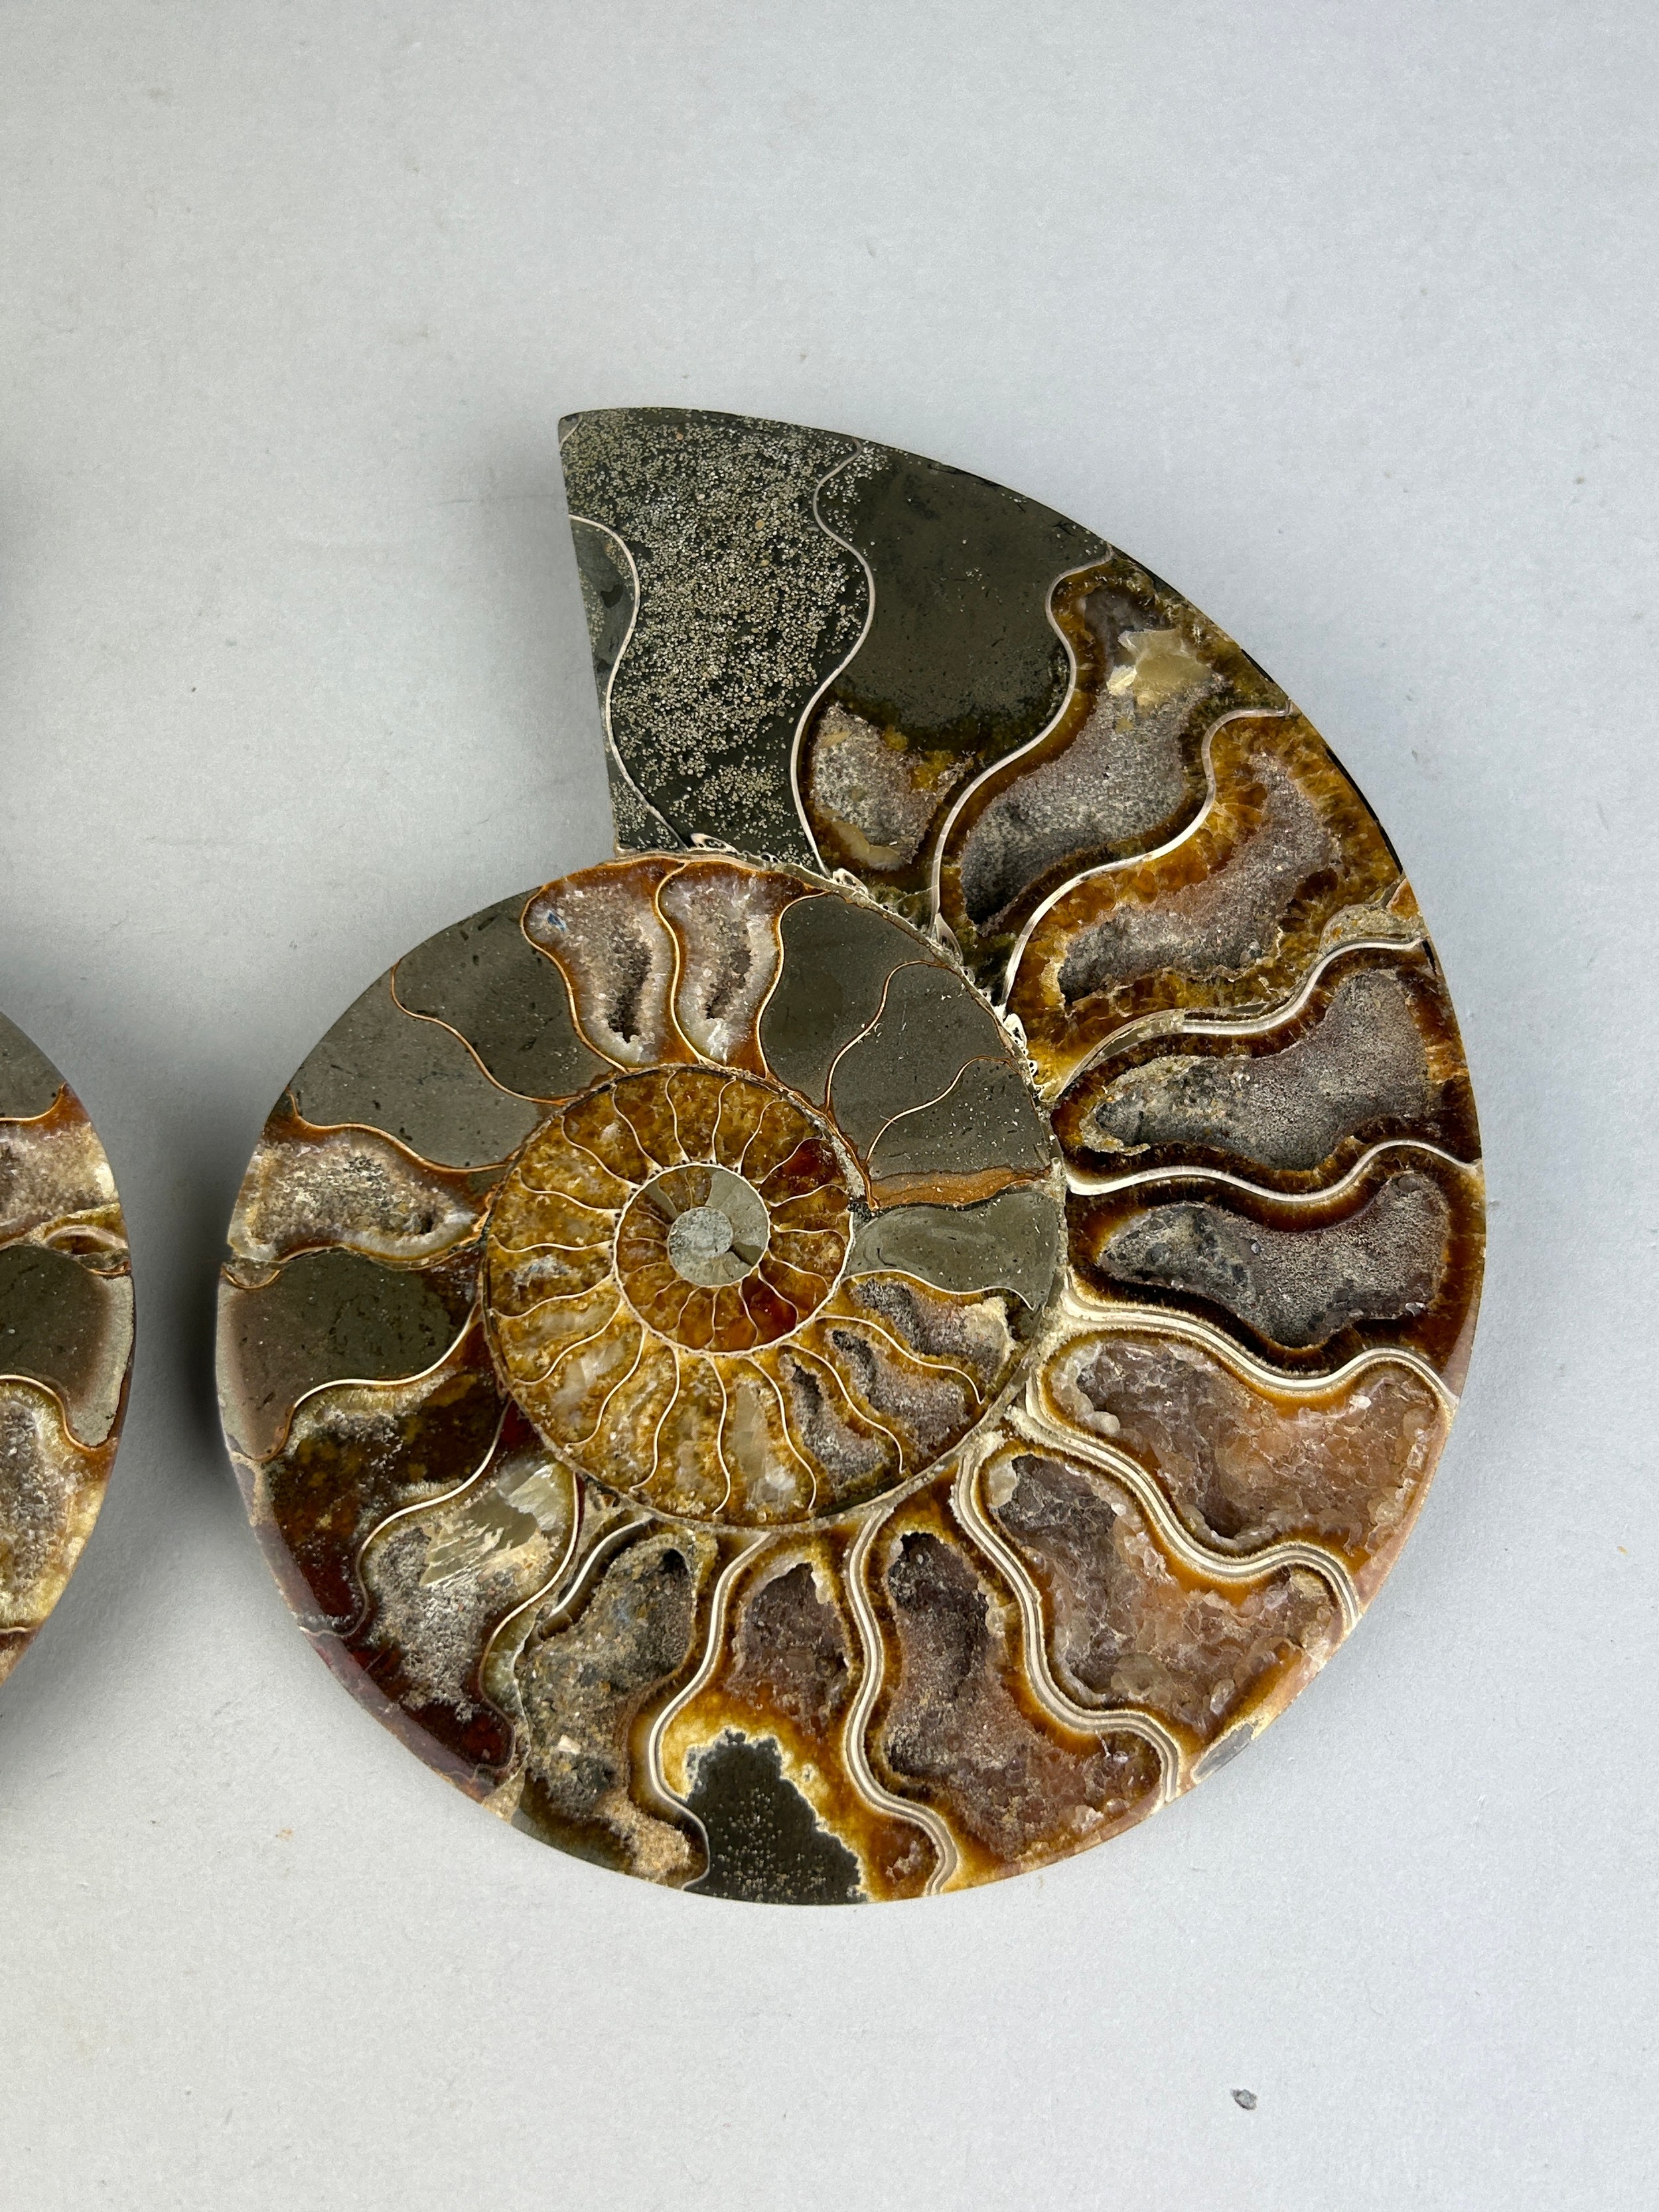 A LARGE CUT AND POLISHED AMMONITE FOSSIL 15cm x 12cm Large Ammonite Fossil from Madagascar, cut - Image 3 of 4